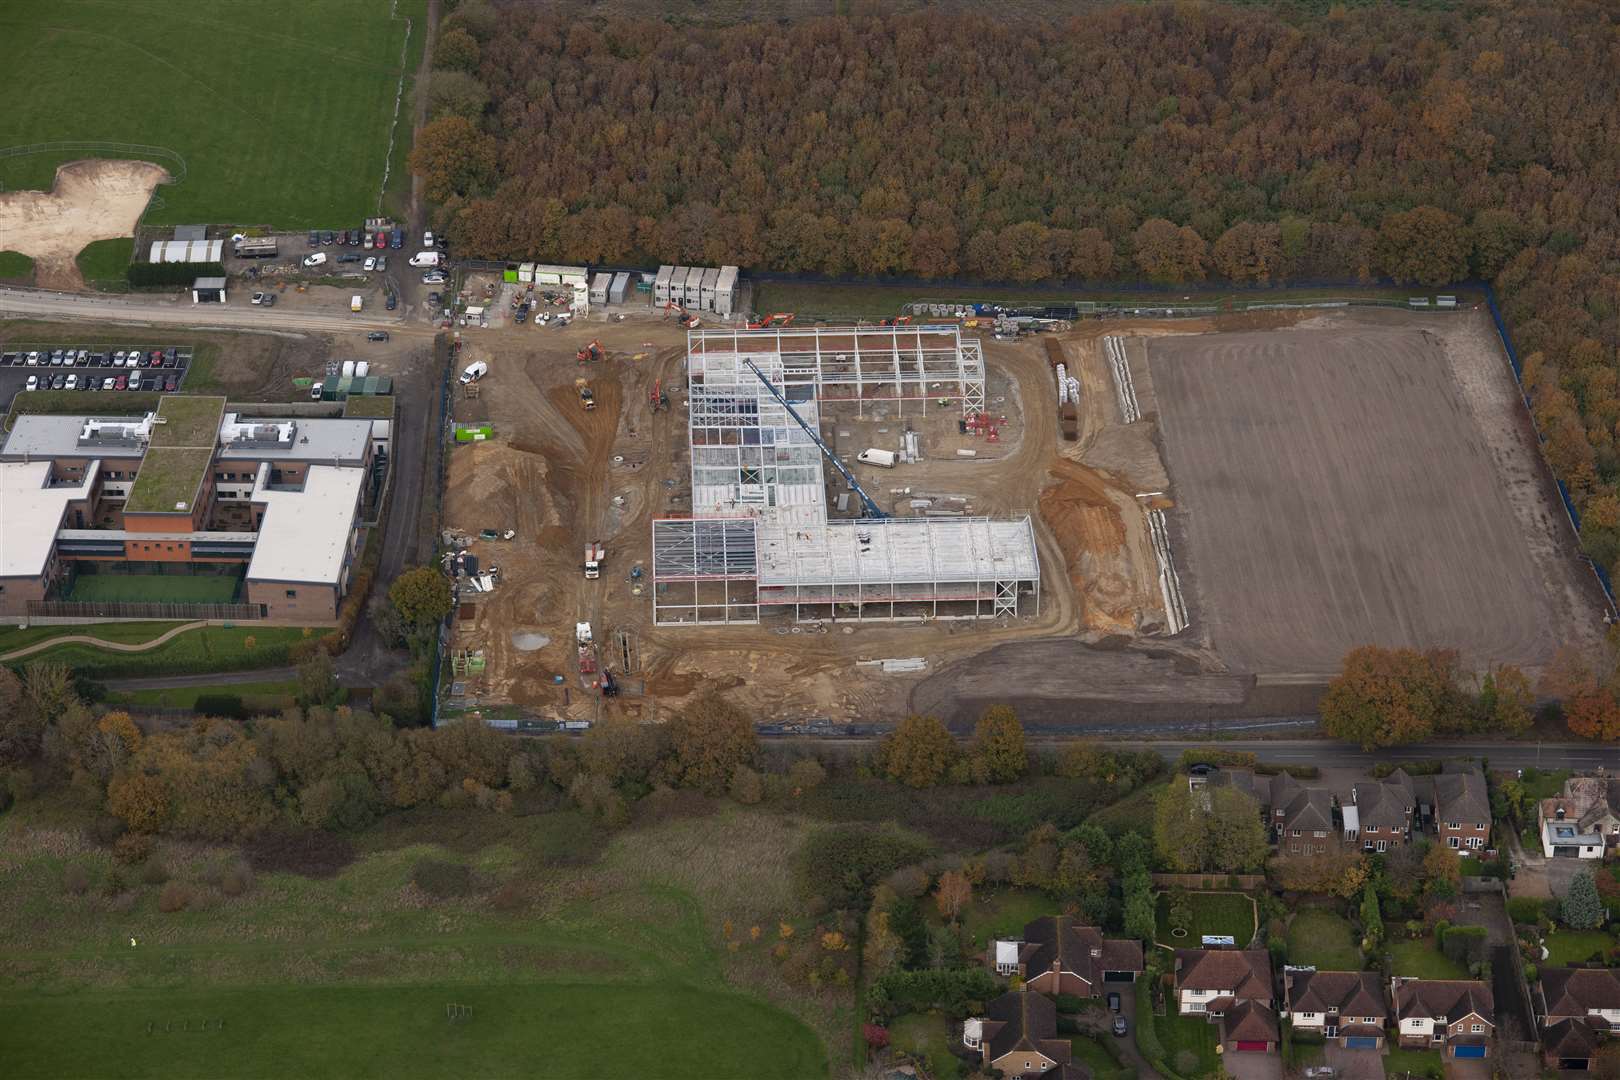 The new Bearsted Primary and Snowfields Schools - seen here under construction - will also be opening in September. Picture: Ady Kerry